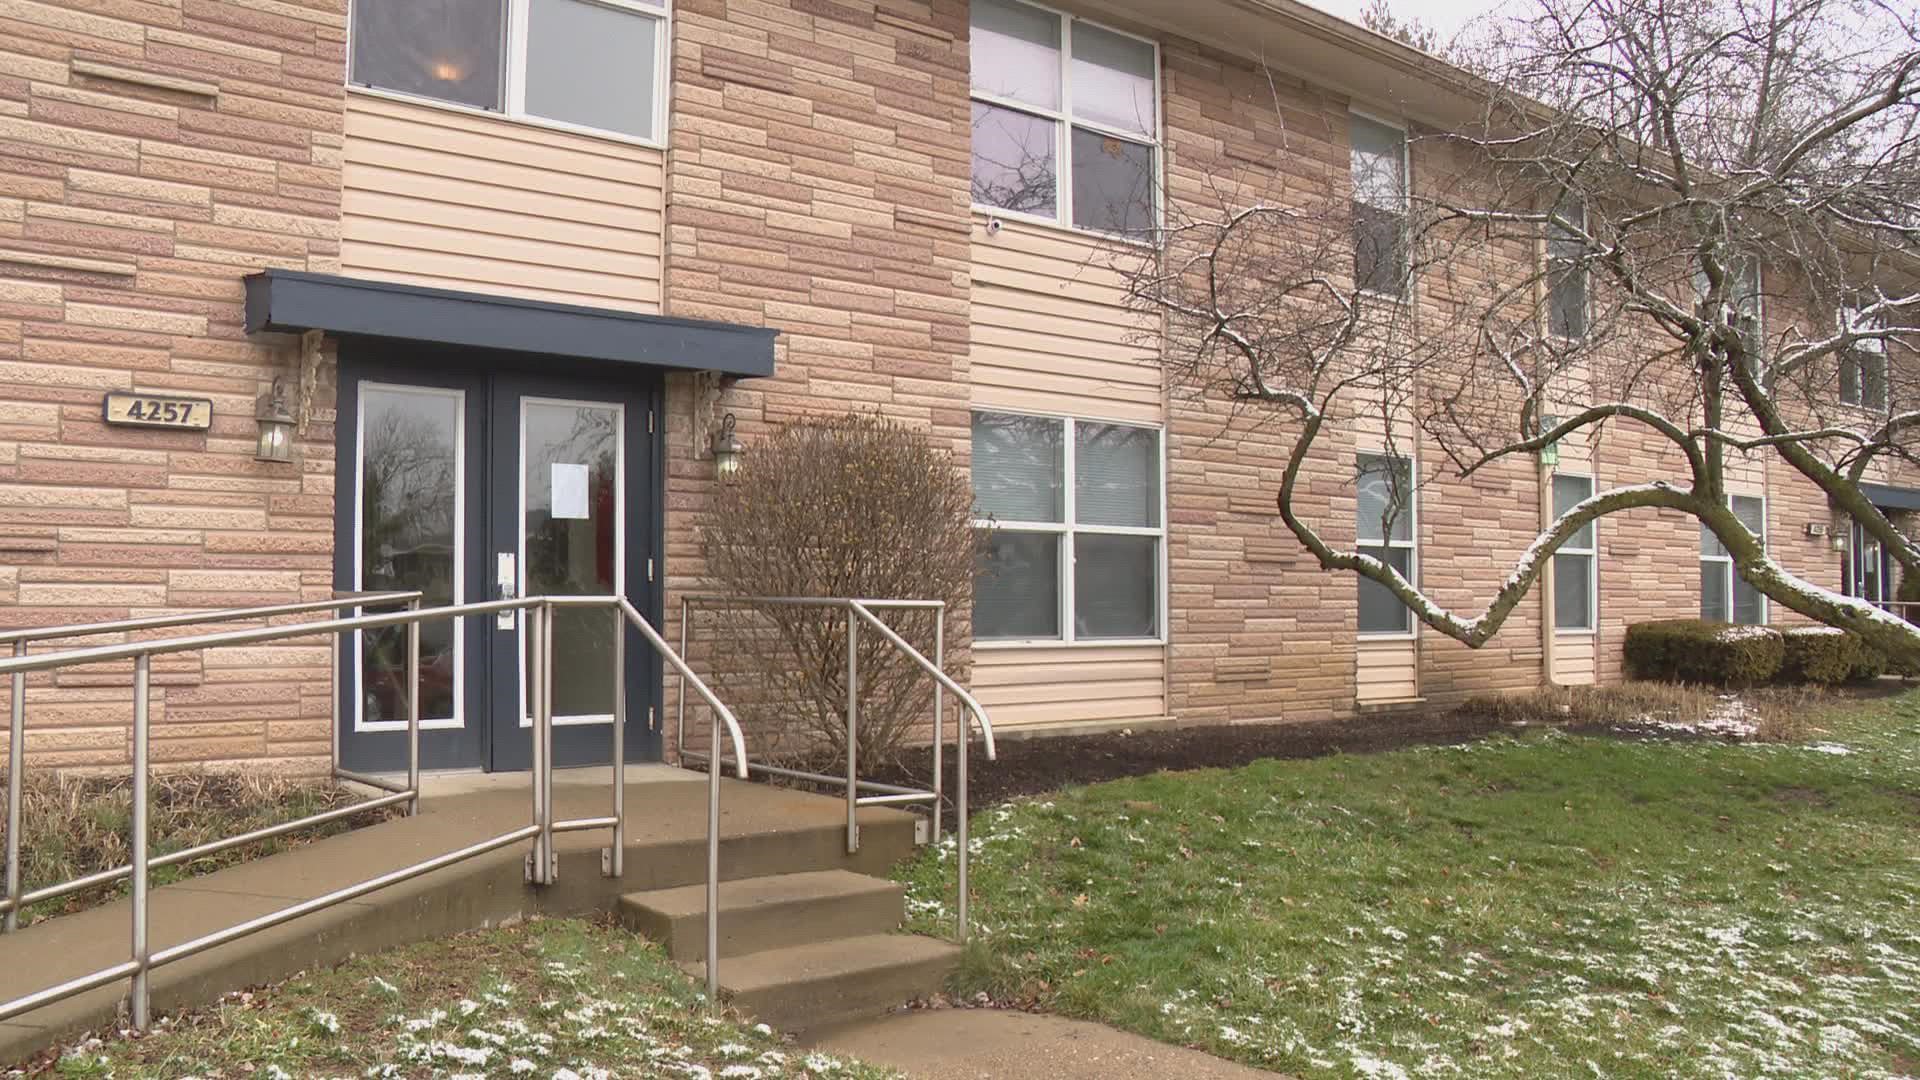 A woman was found shot in the Pine Glen Apartments early Sunday morning. She died at the hospital.